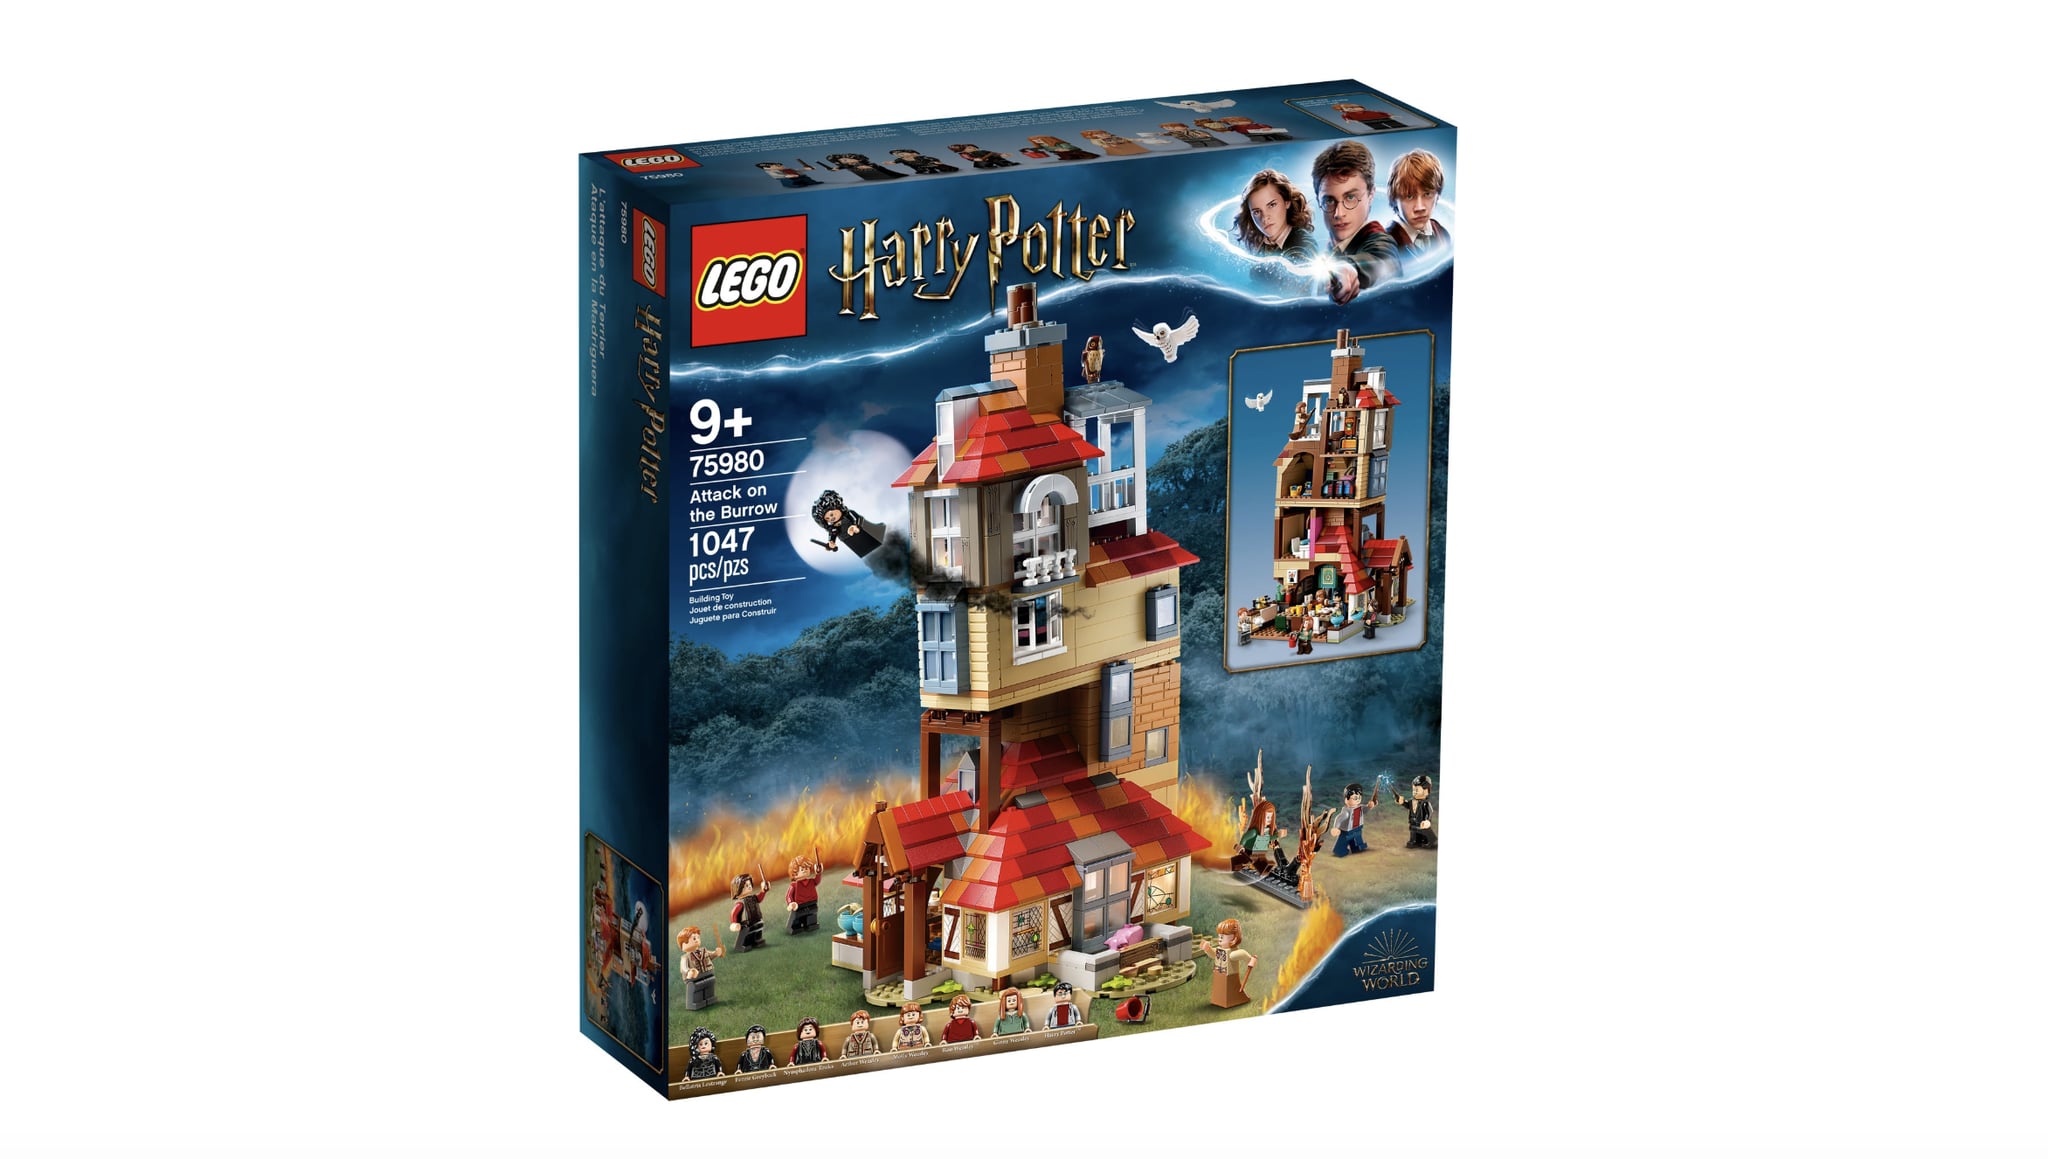 Lego Harry Potter Attack on the Burrow Set